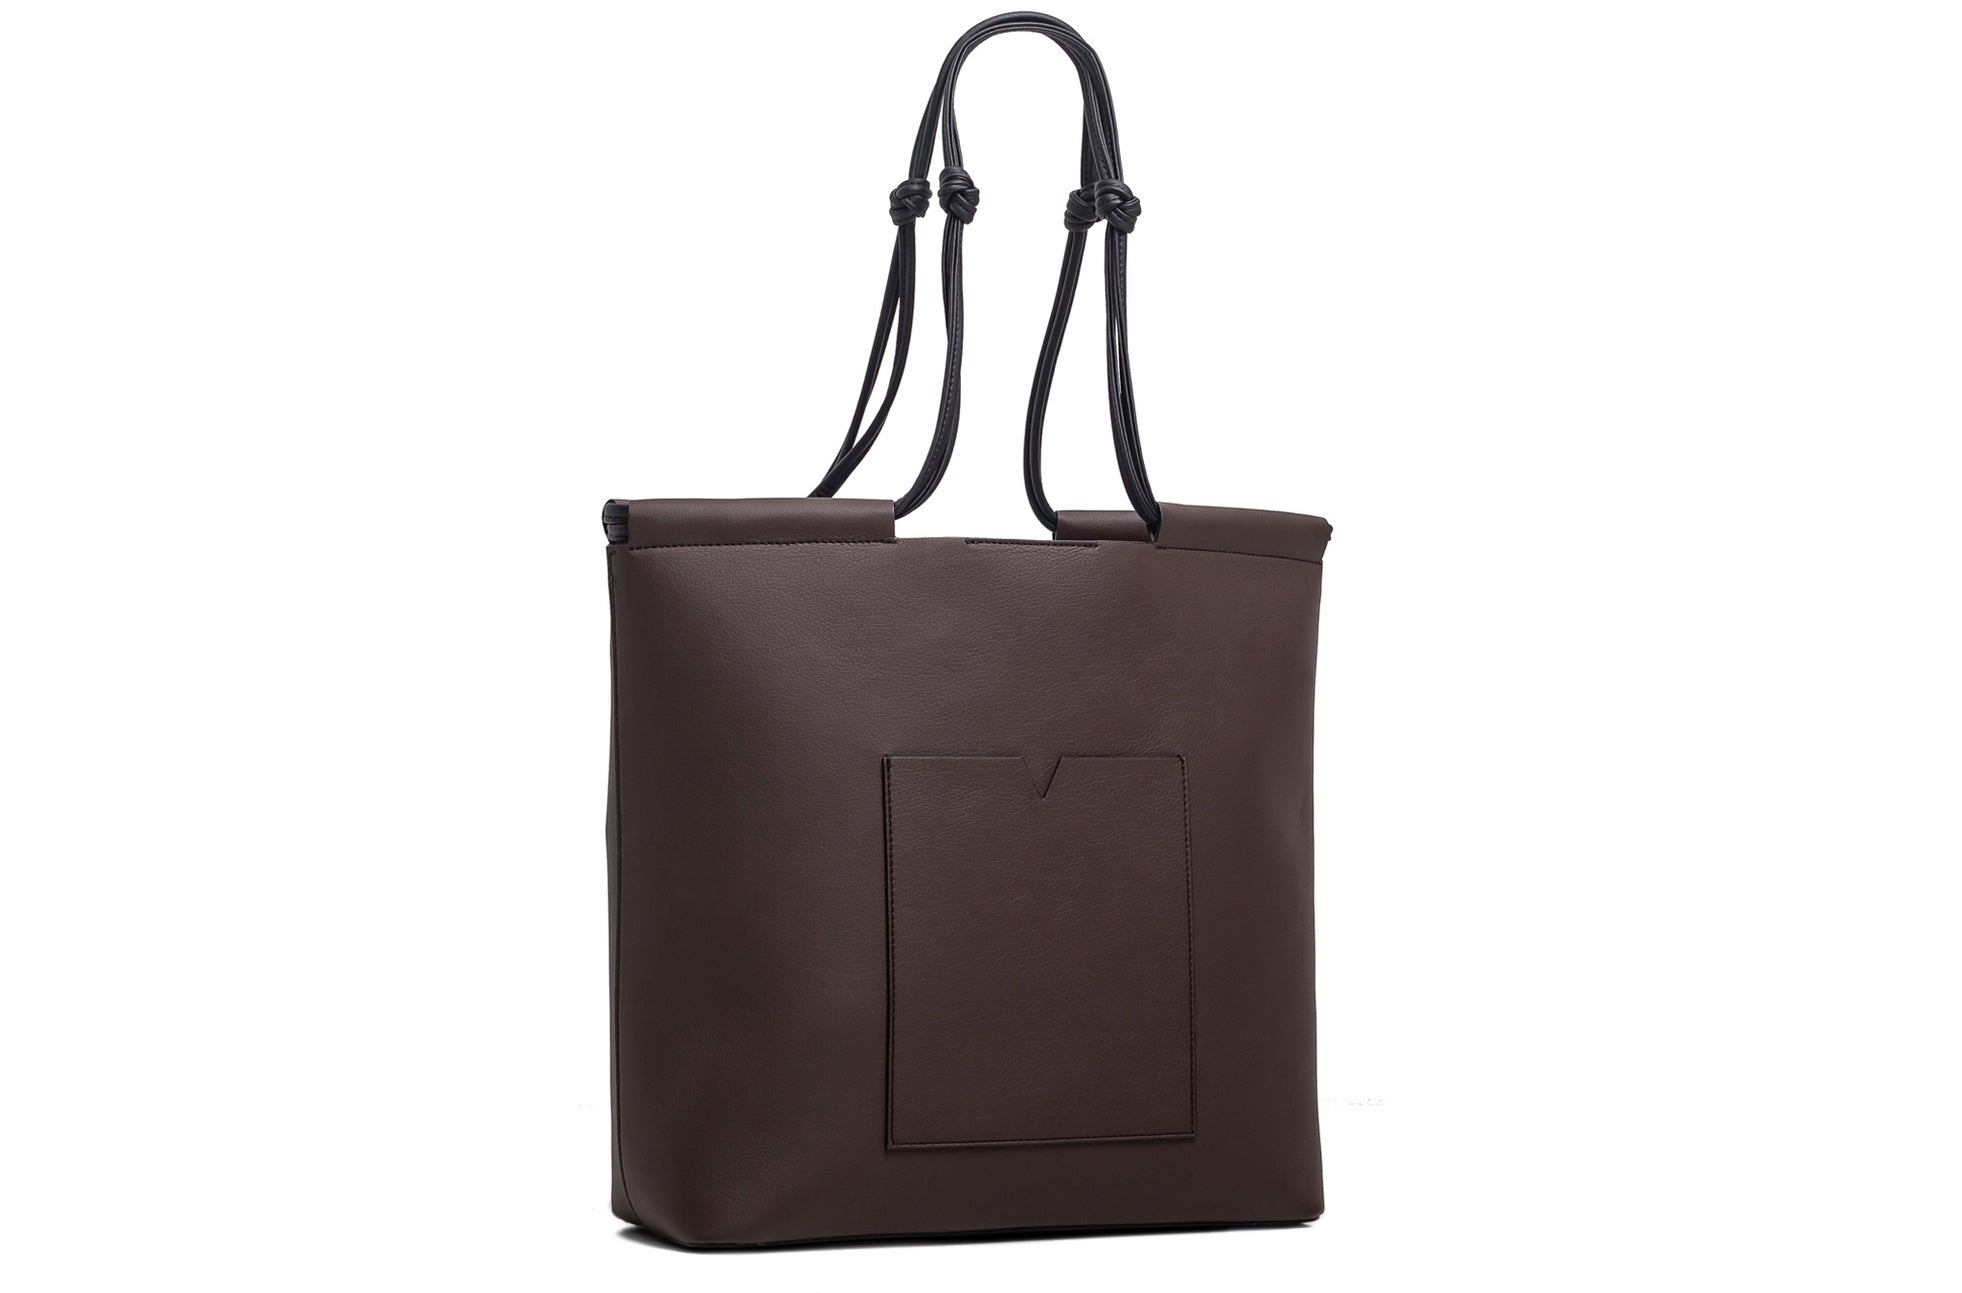 The Market Tote in Technik-Leather in Taupe and Black image 3